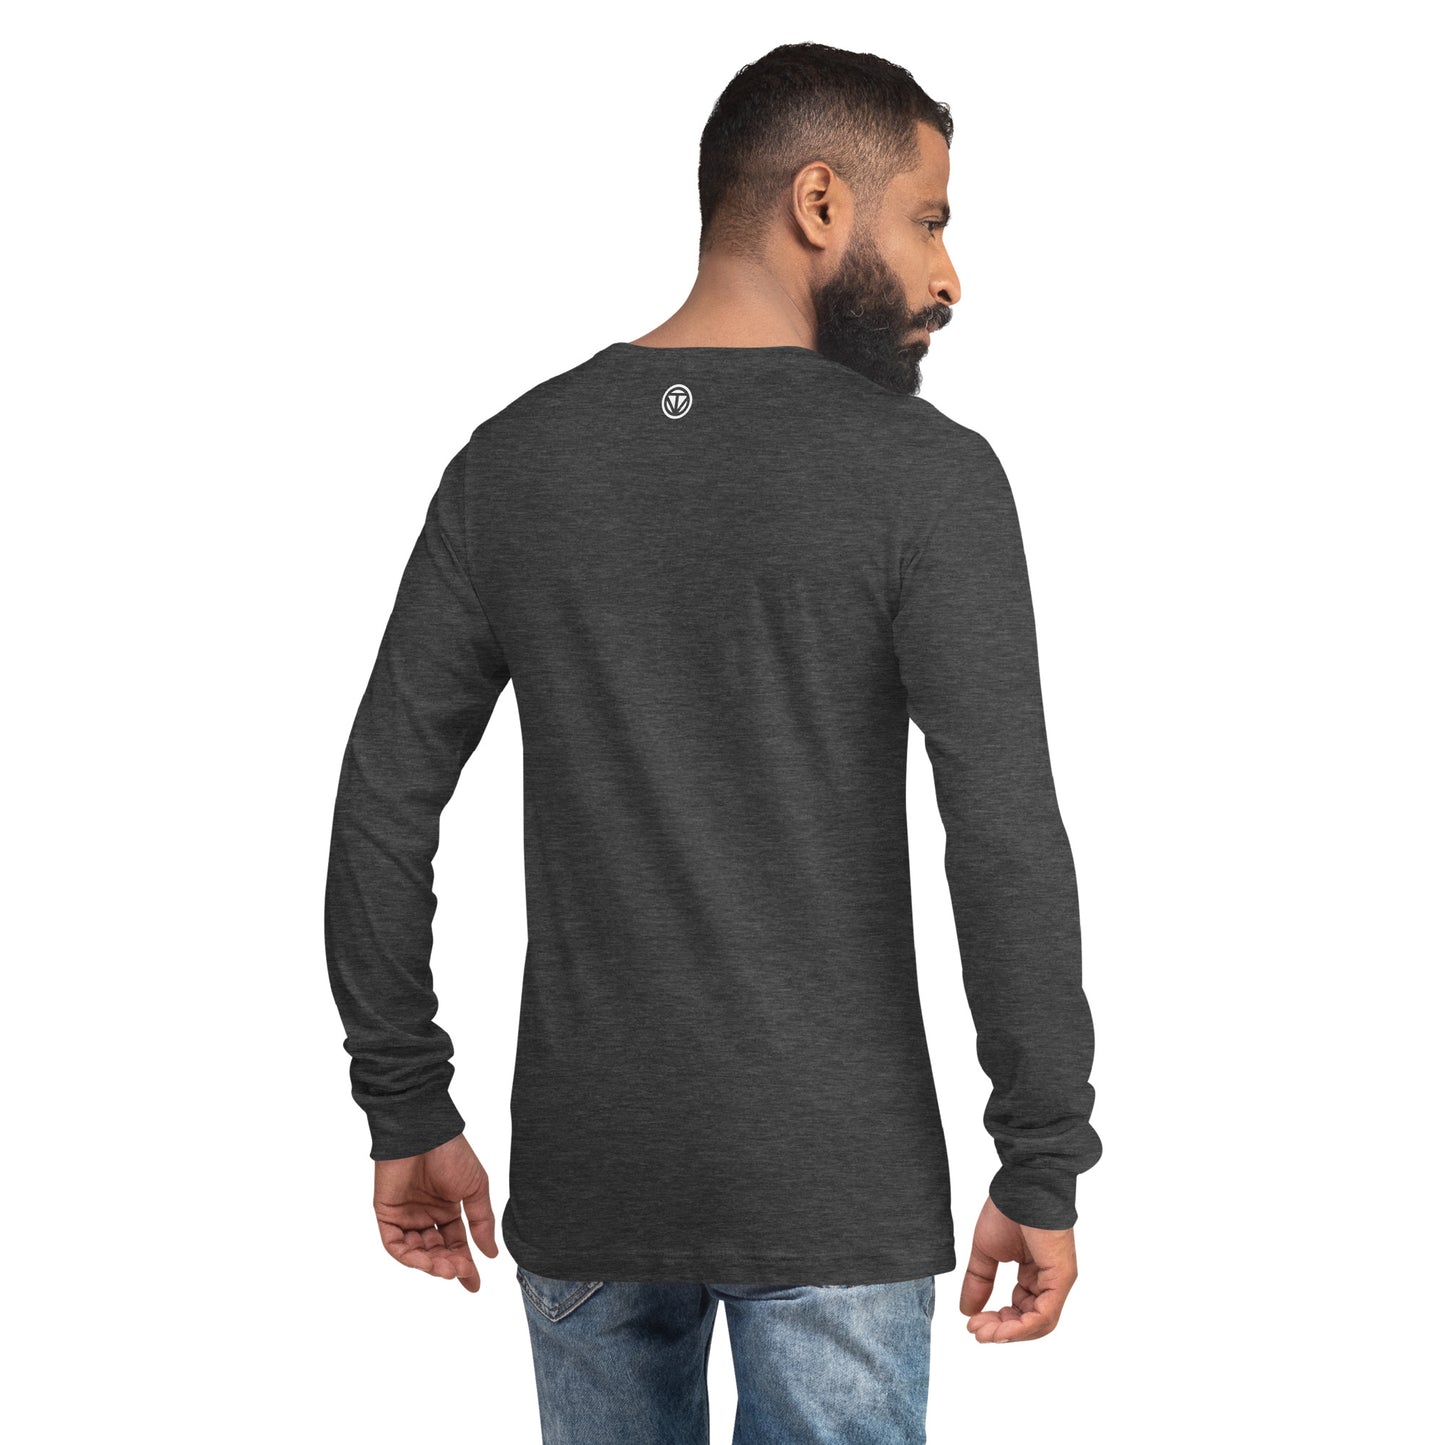 TIME OF VIBES - Long Sleeve Tee RIDE (Darkgrey) - €39.00